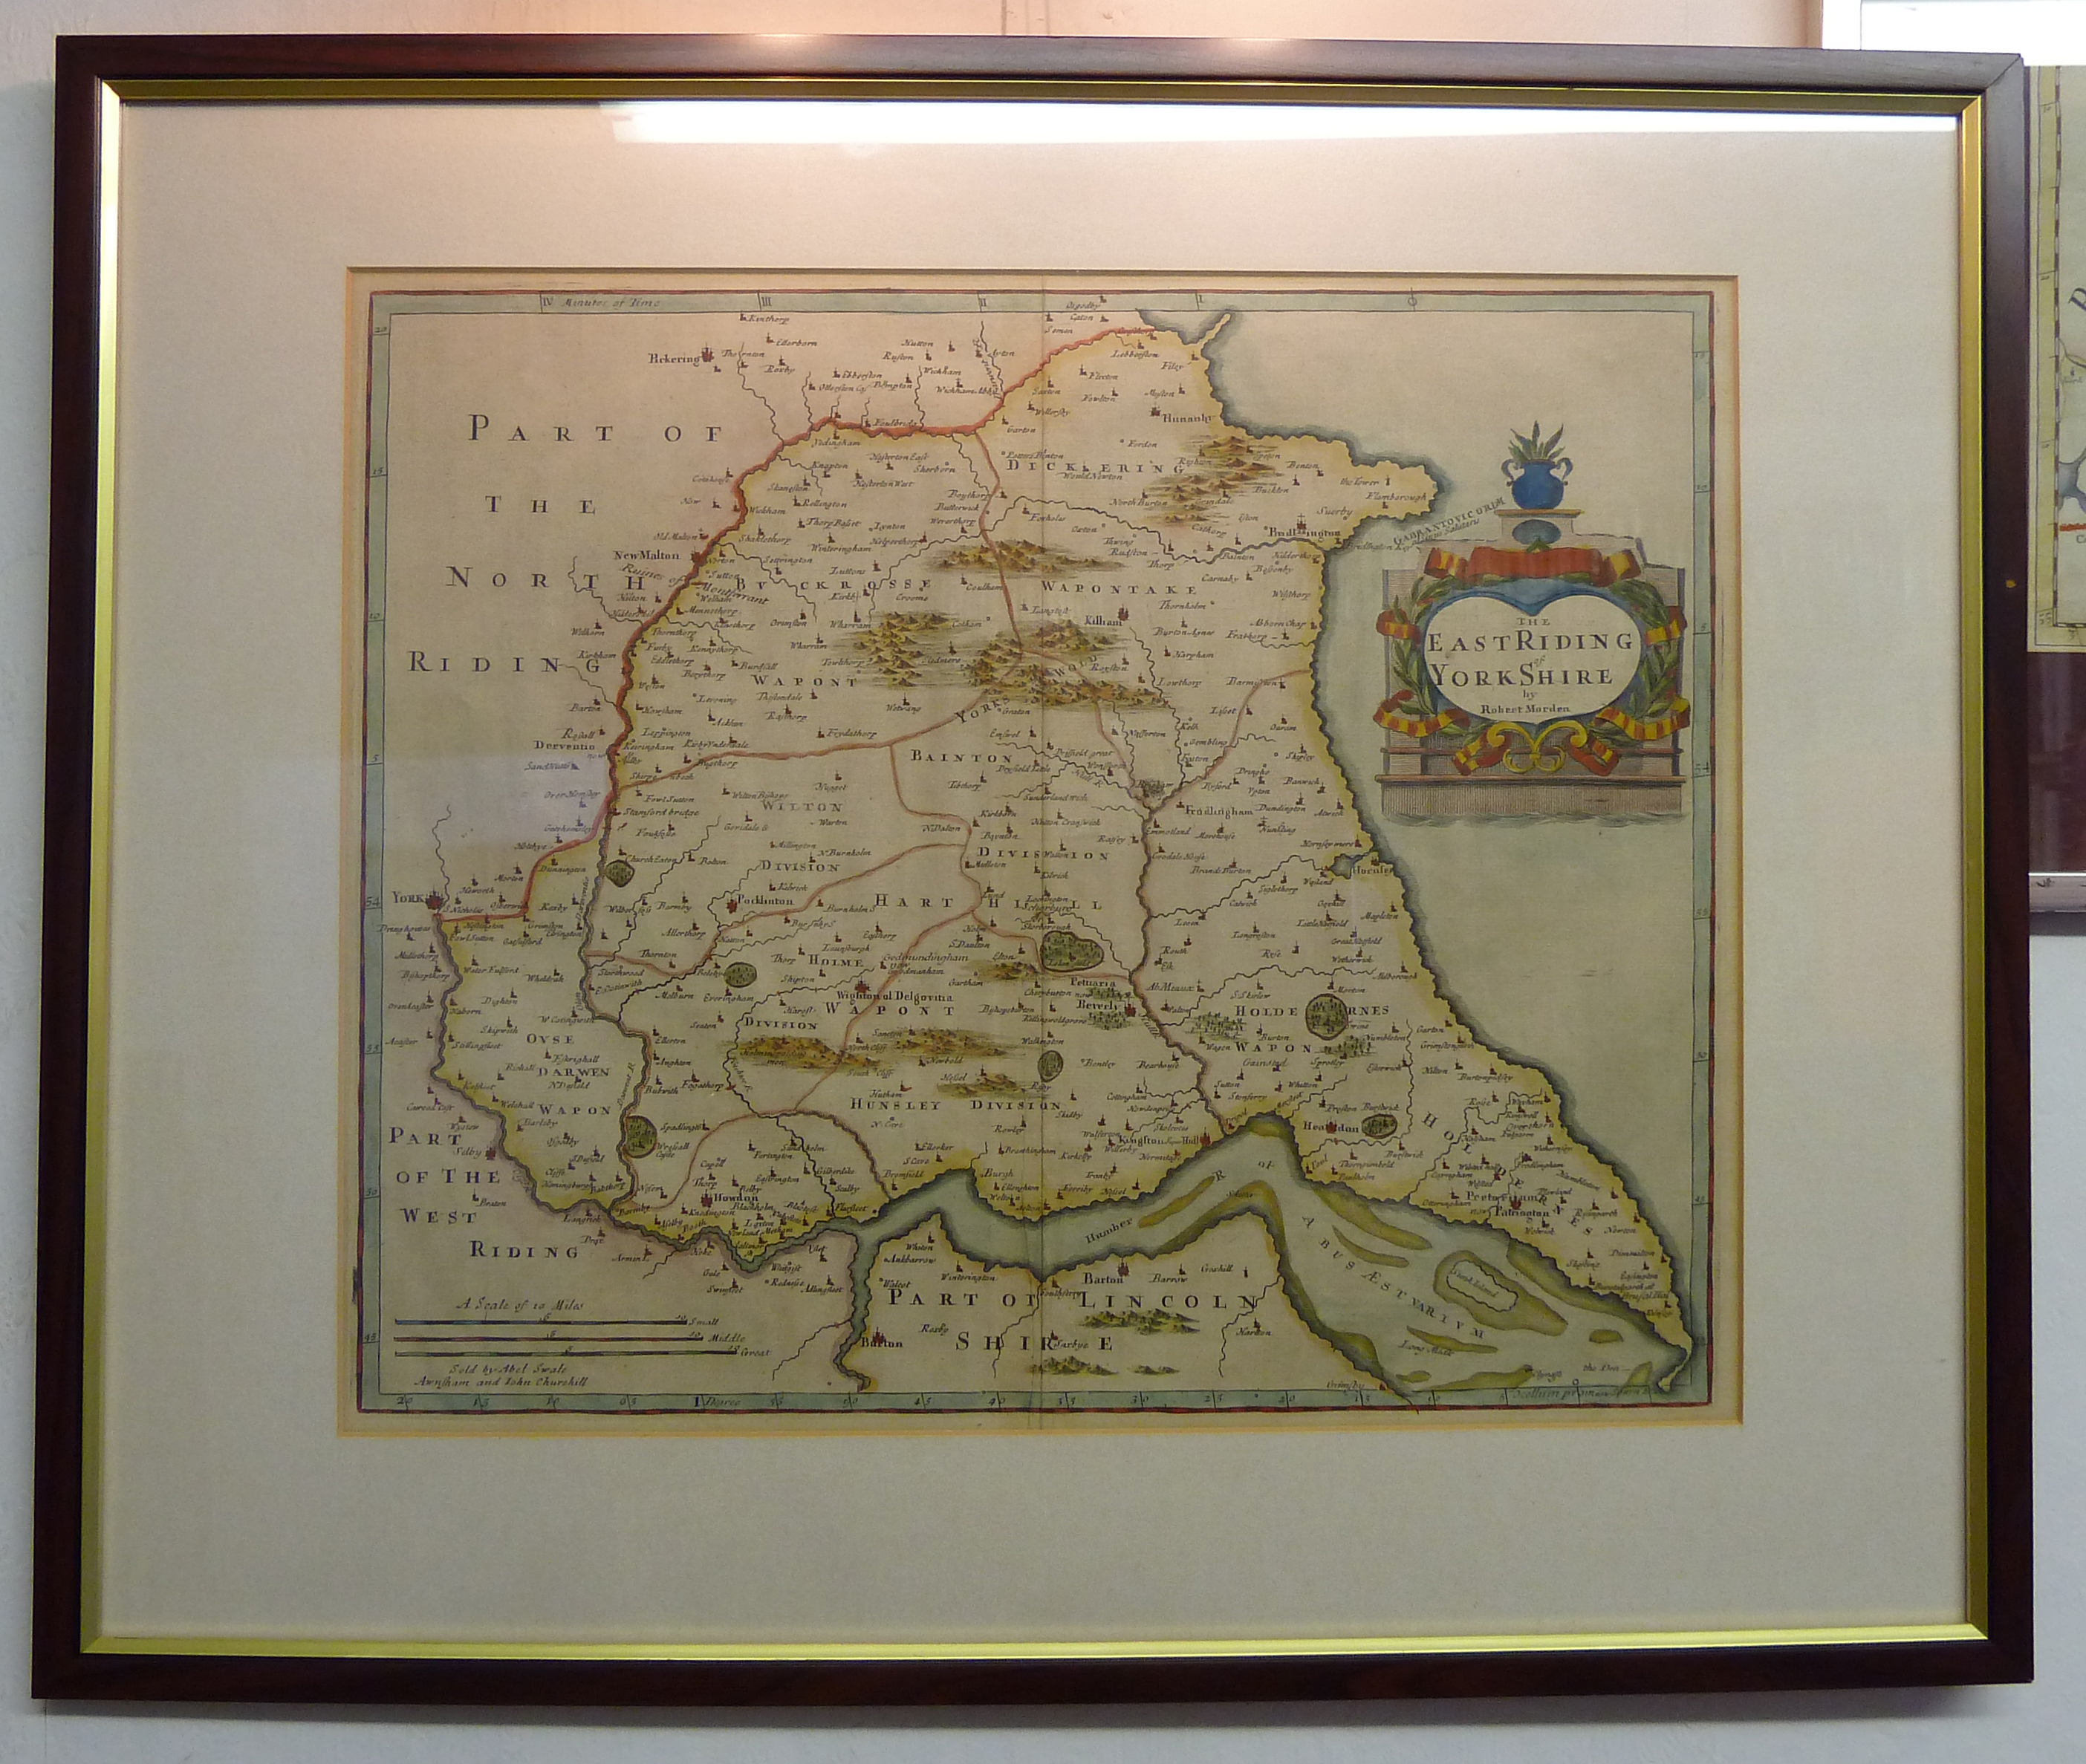 Robert Morden Map of East Riding Yorkshire